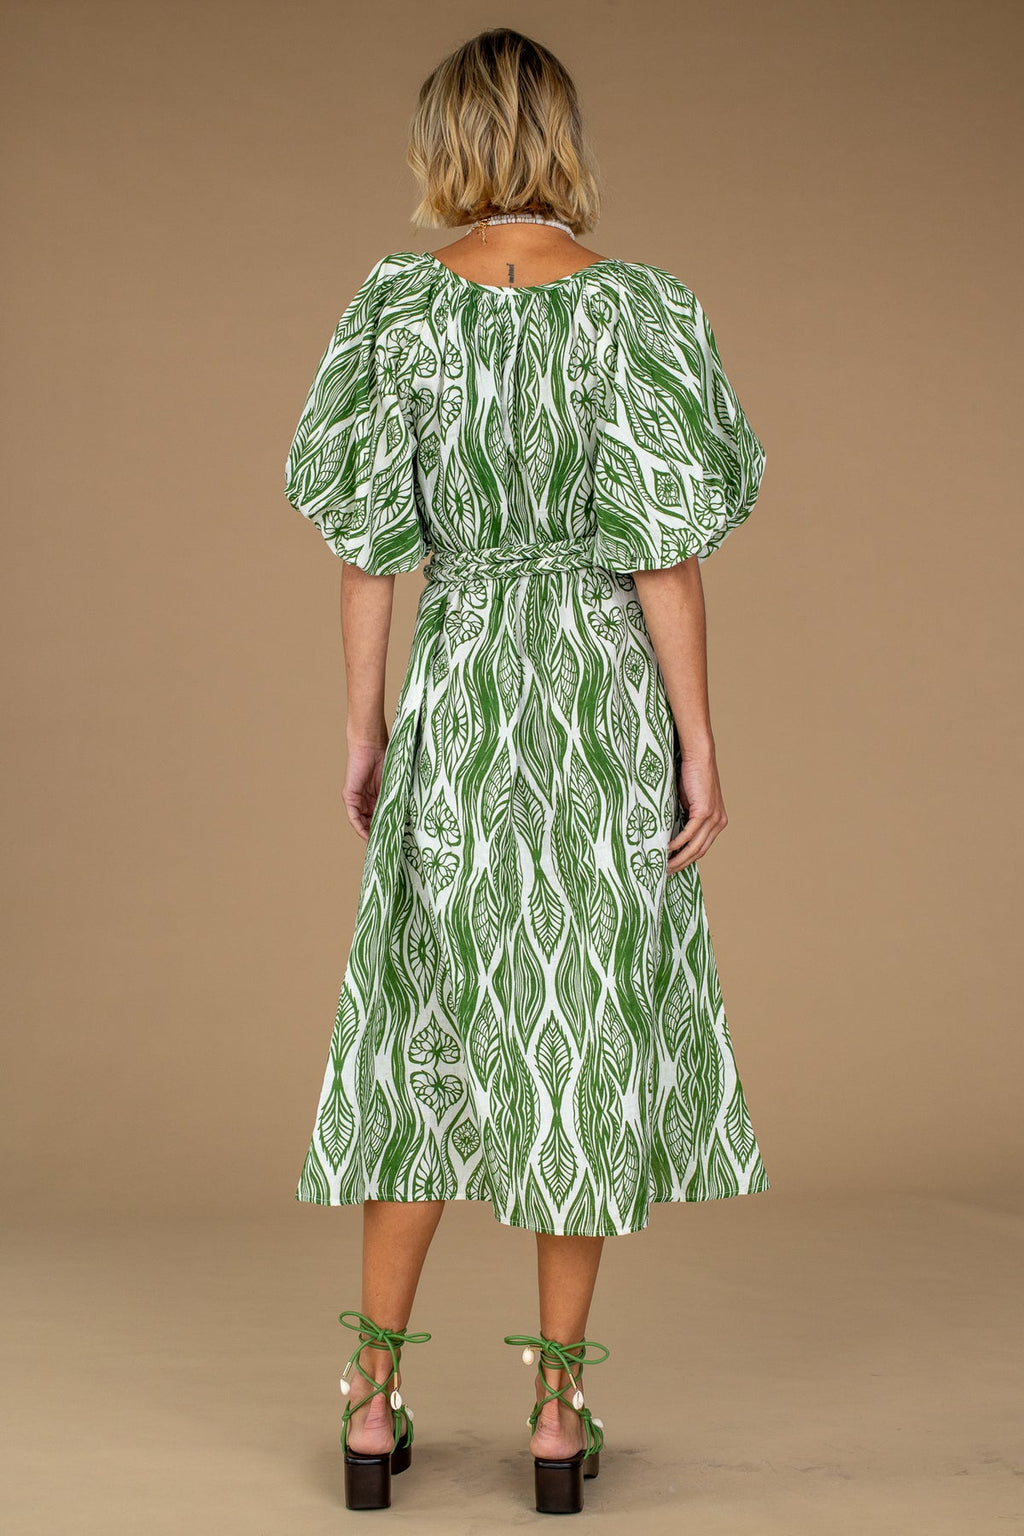 Olivia James Penny Dress in Lillypad